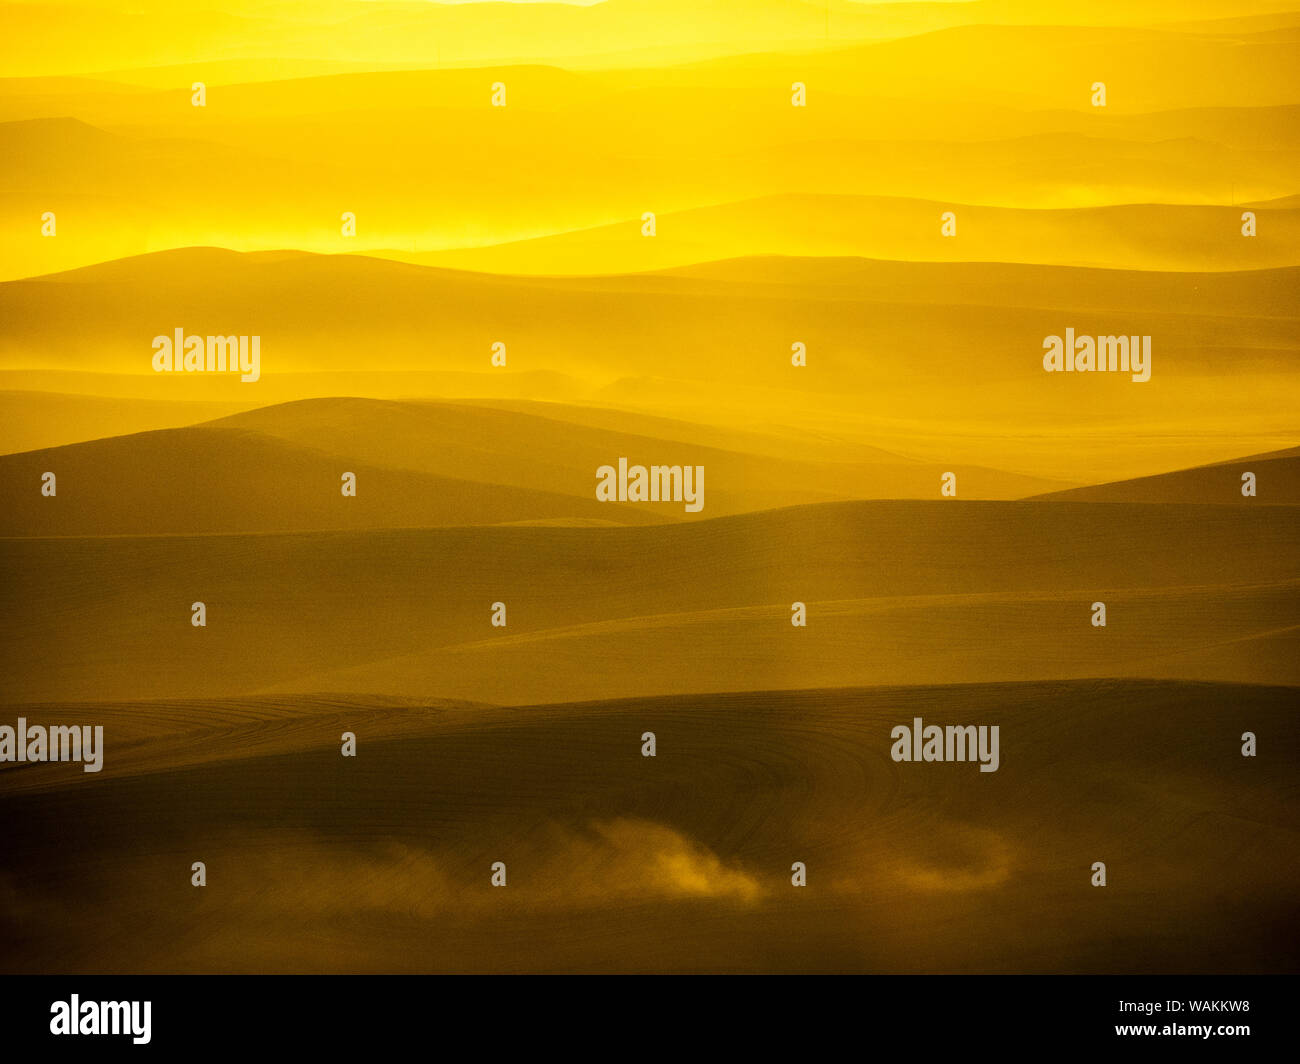 USA, Washington State, Palouse Region. Sunset over rolling hills with dust in the air Stock Photo